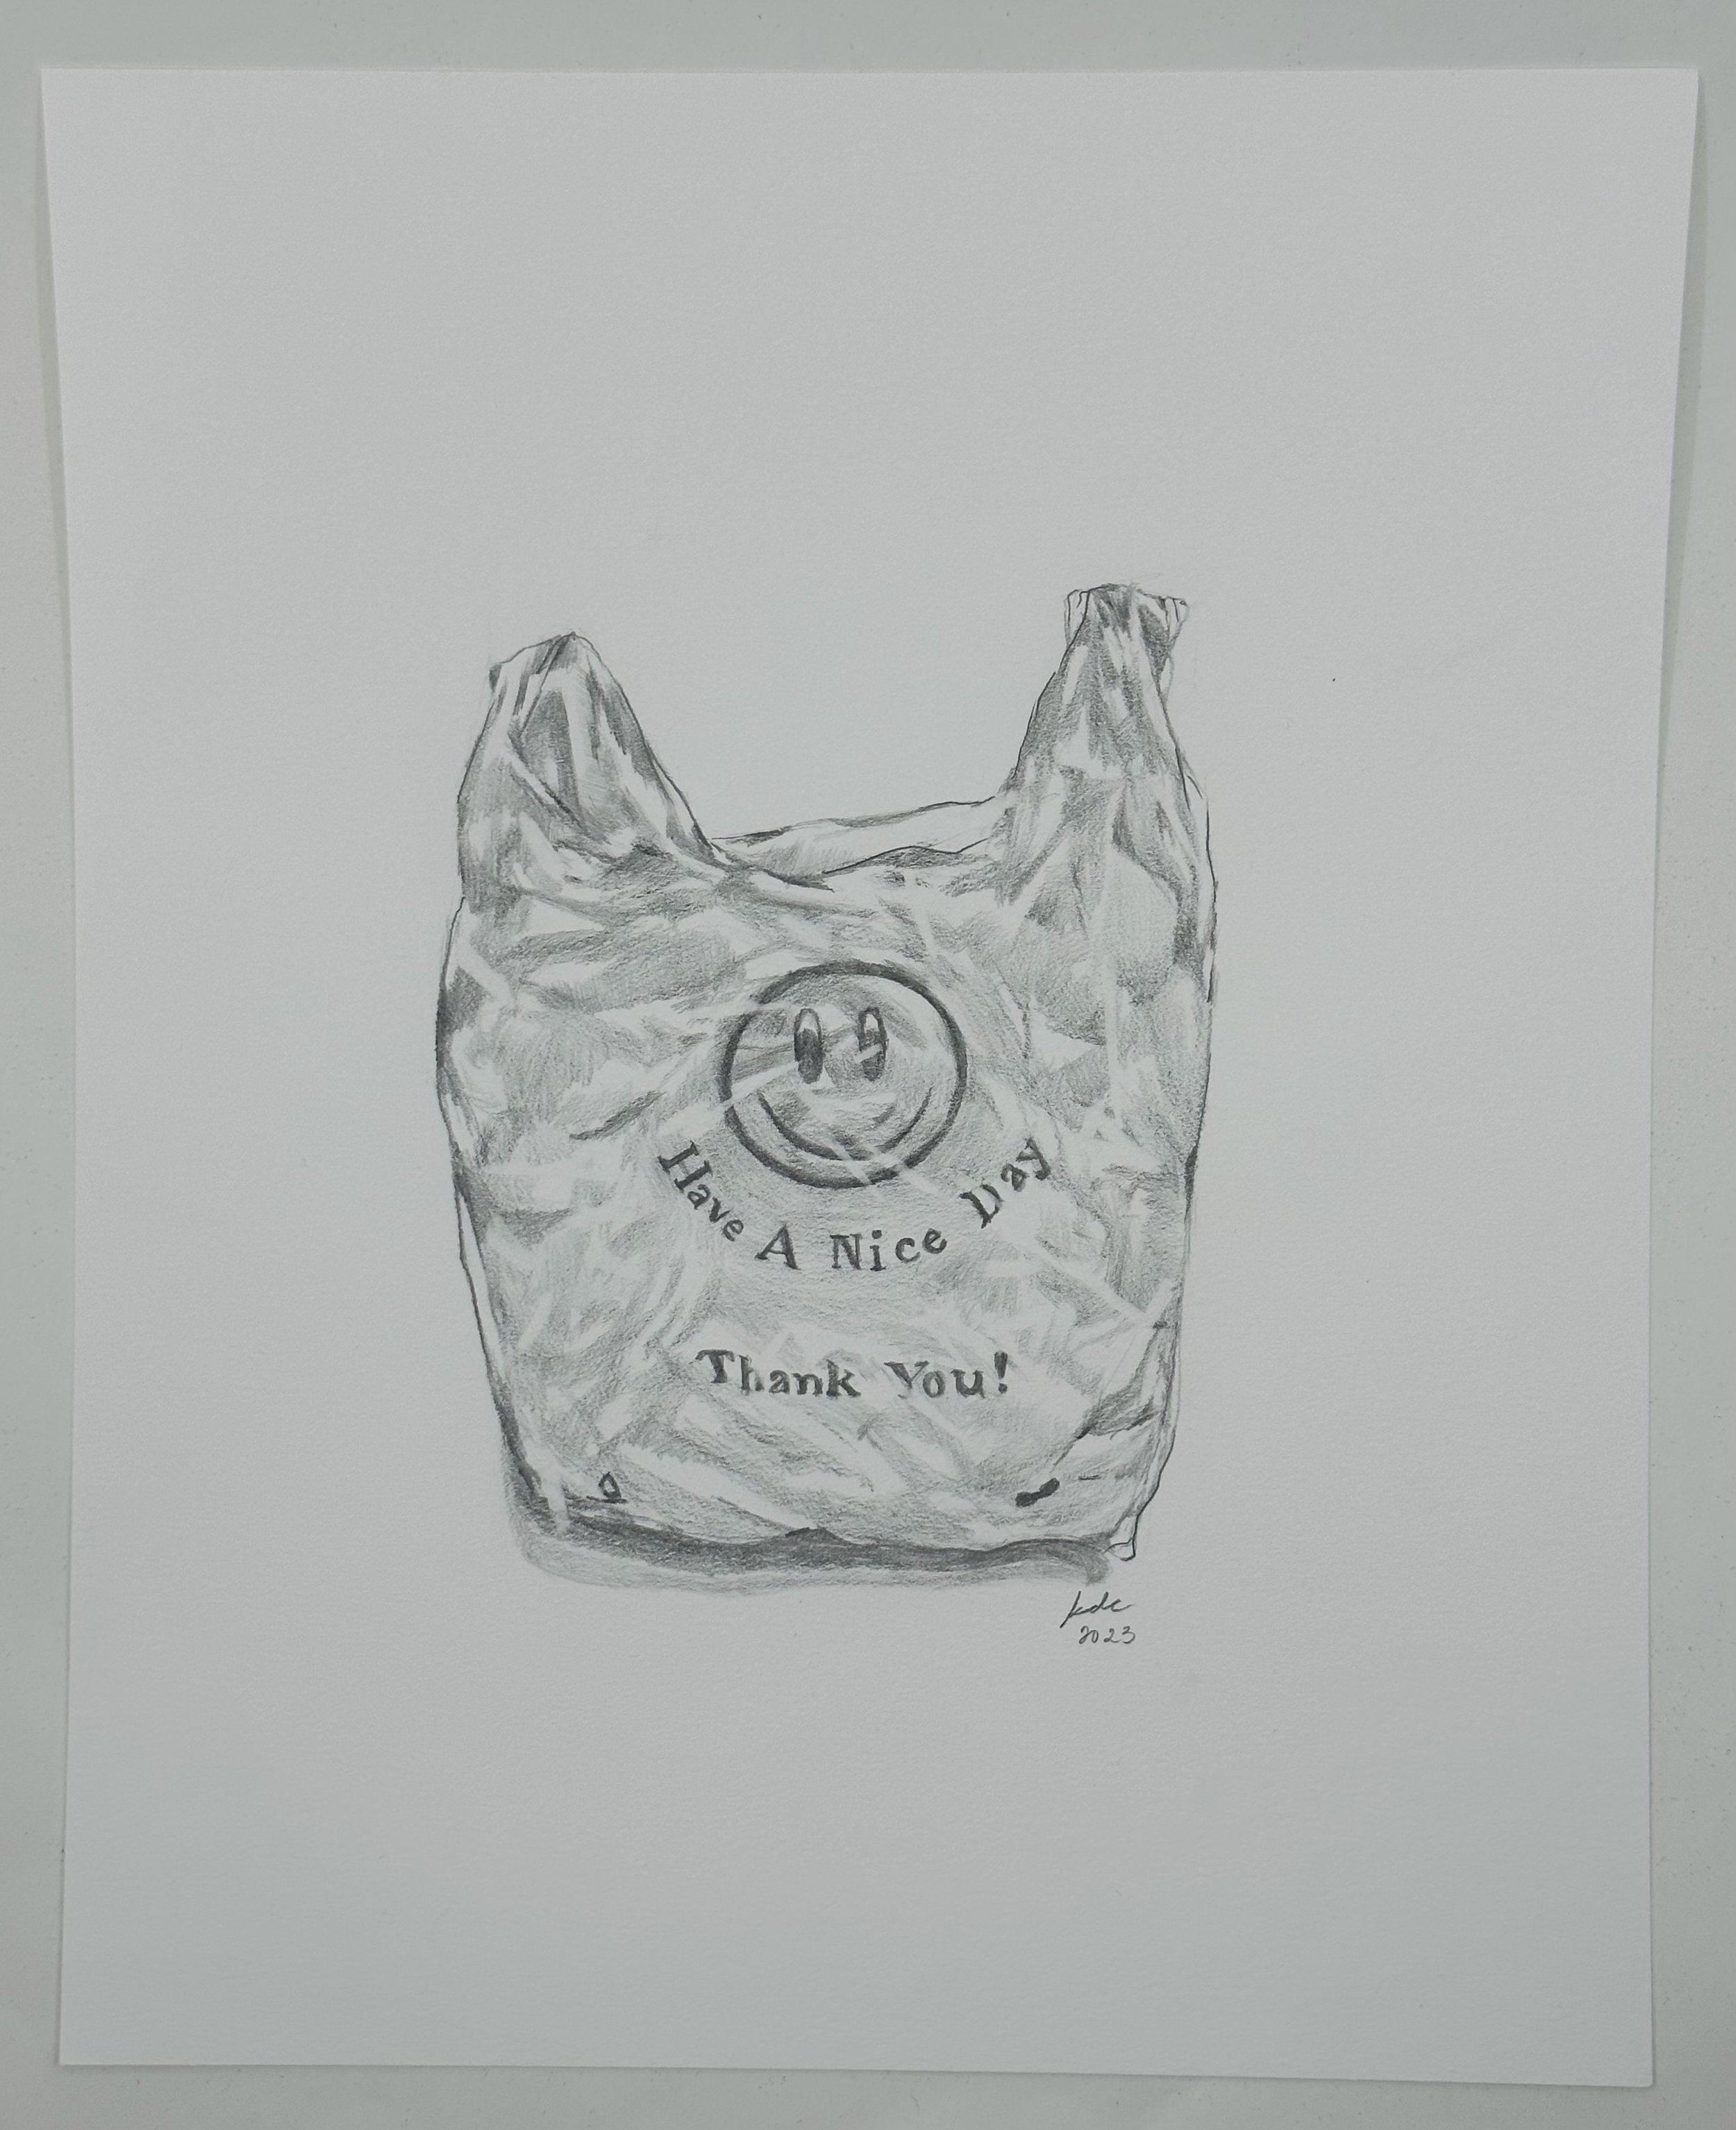 How to draw plastic bag / LetsDrawIt